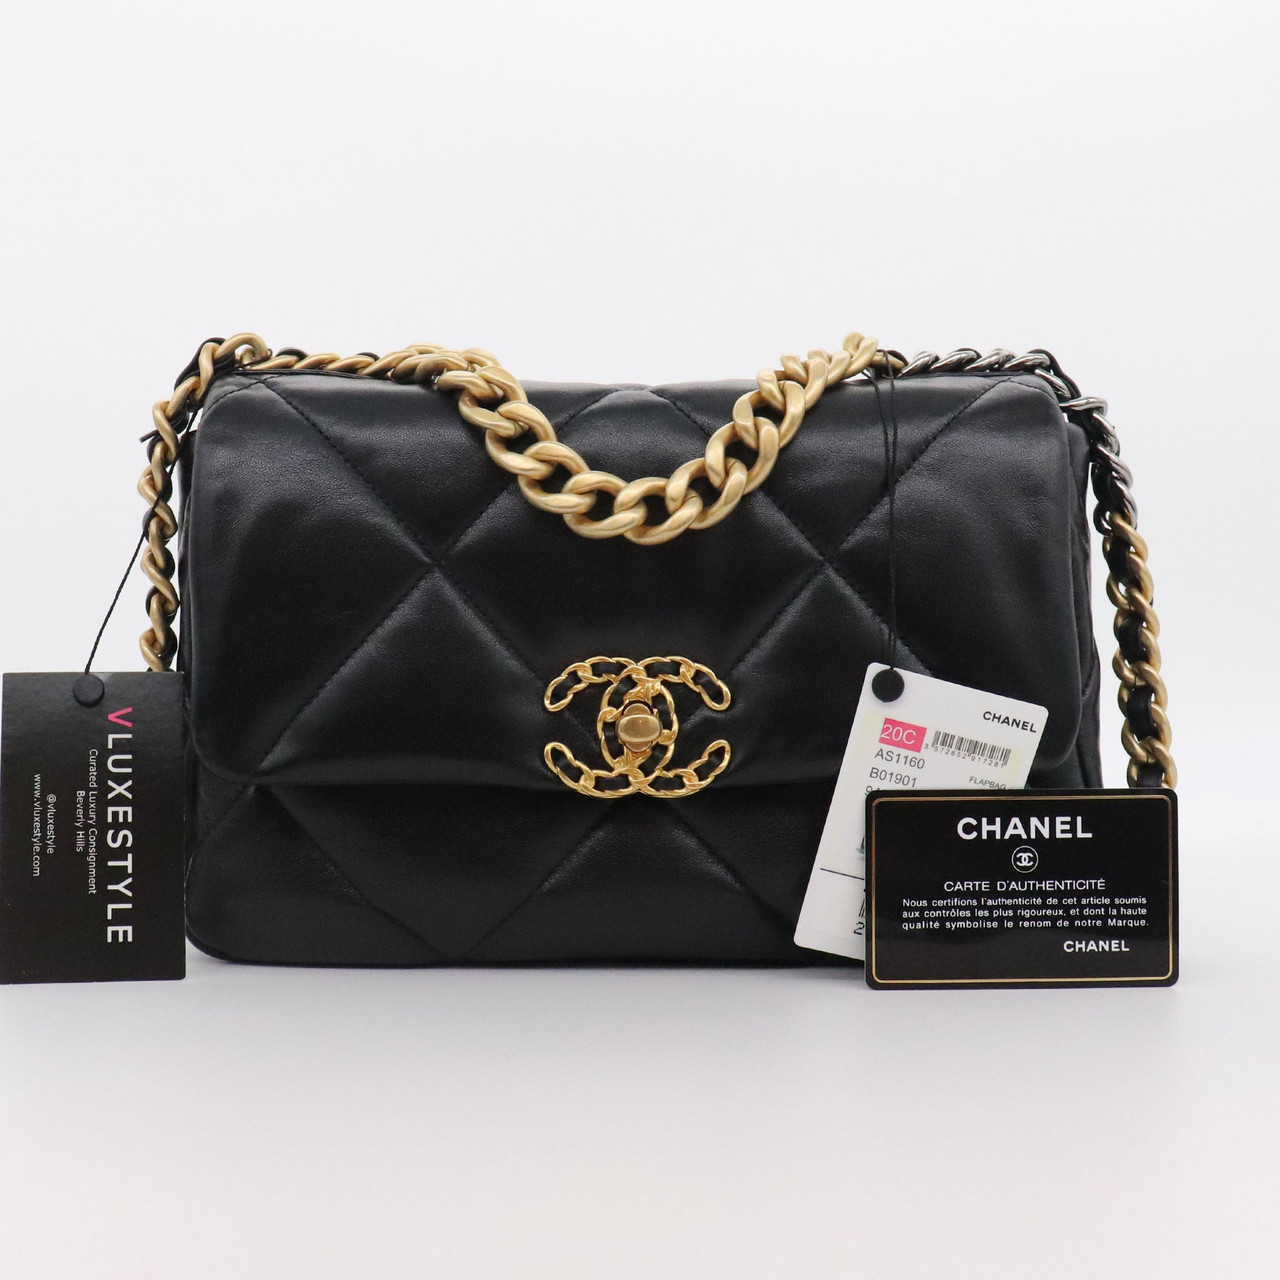 CHANEL TWO TONE DOUBLE FLAP BAG GRAY AND BLACK WITH LEATHER